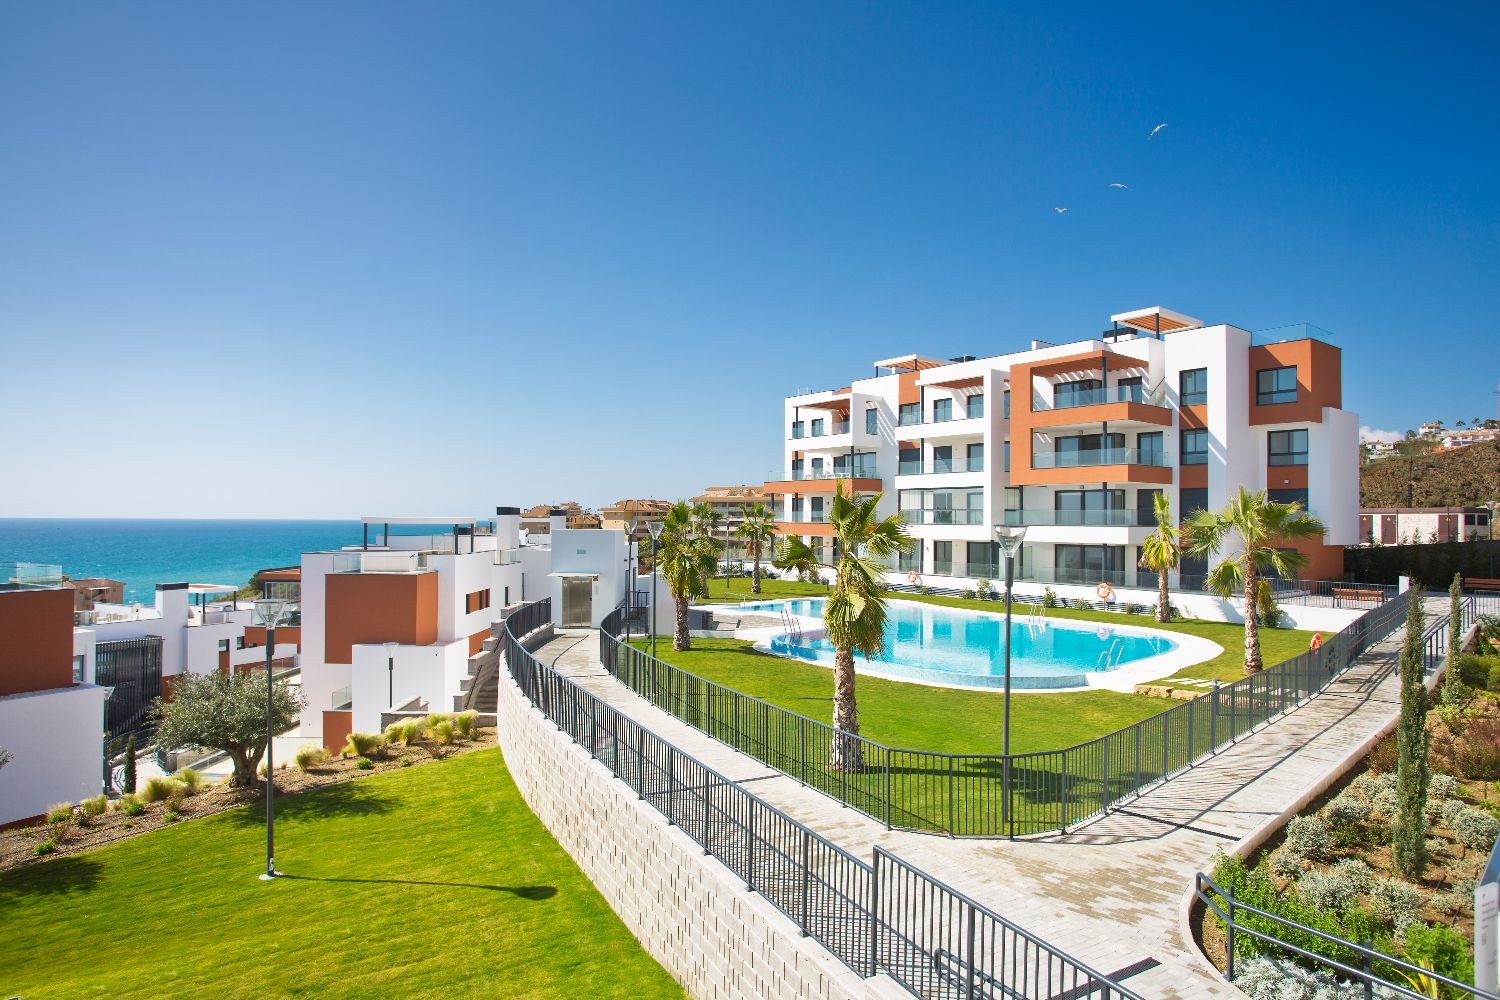 Spacious 3 bedroom apartment in a privileged location a few minutes from the beach with terrace of 62 m2